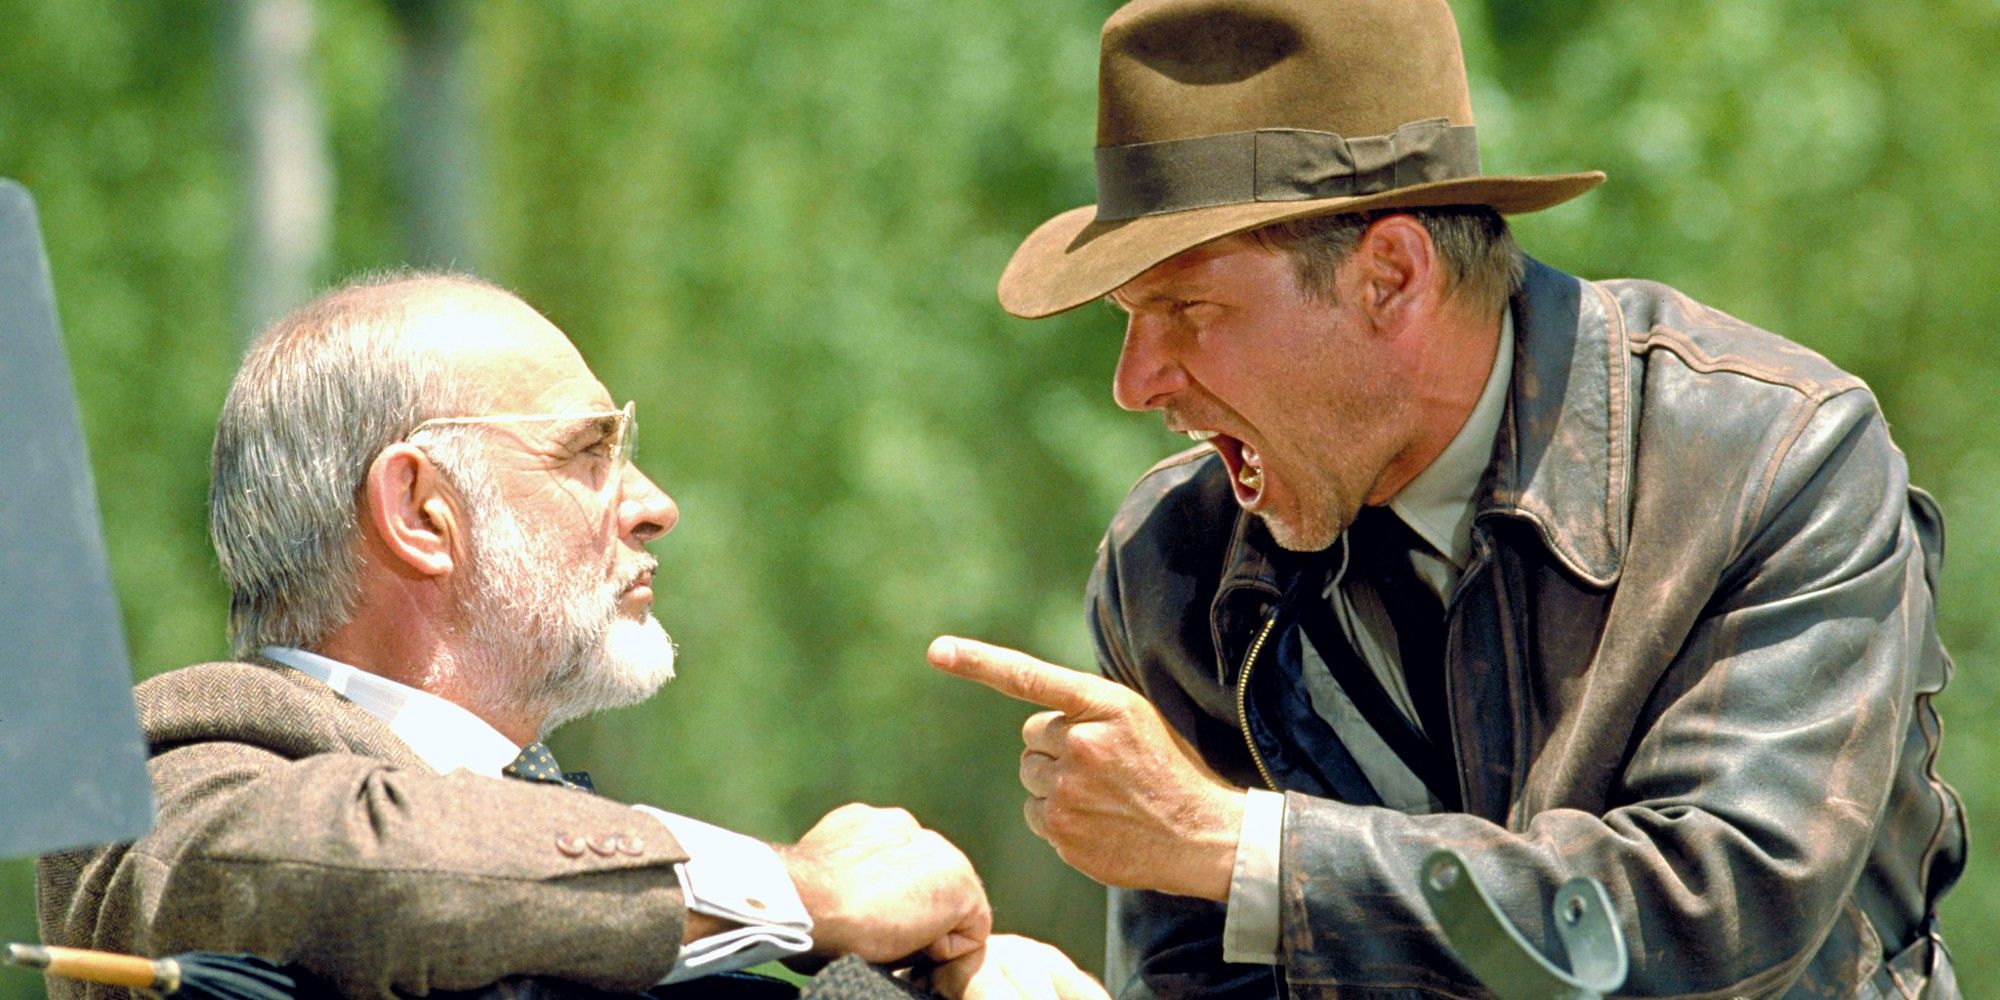 Harrison Ford as Indiana Jones yelling at Sean Connery as Dr Henry Jones in The Last Crusade